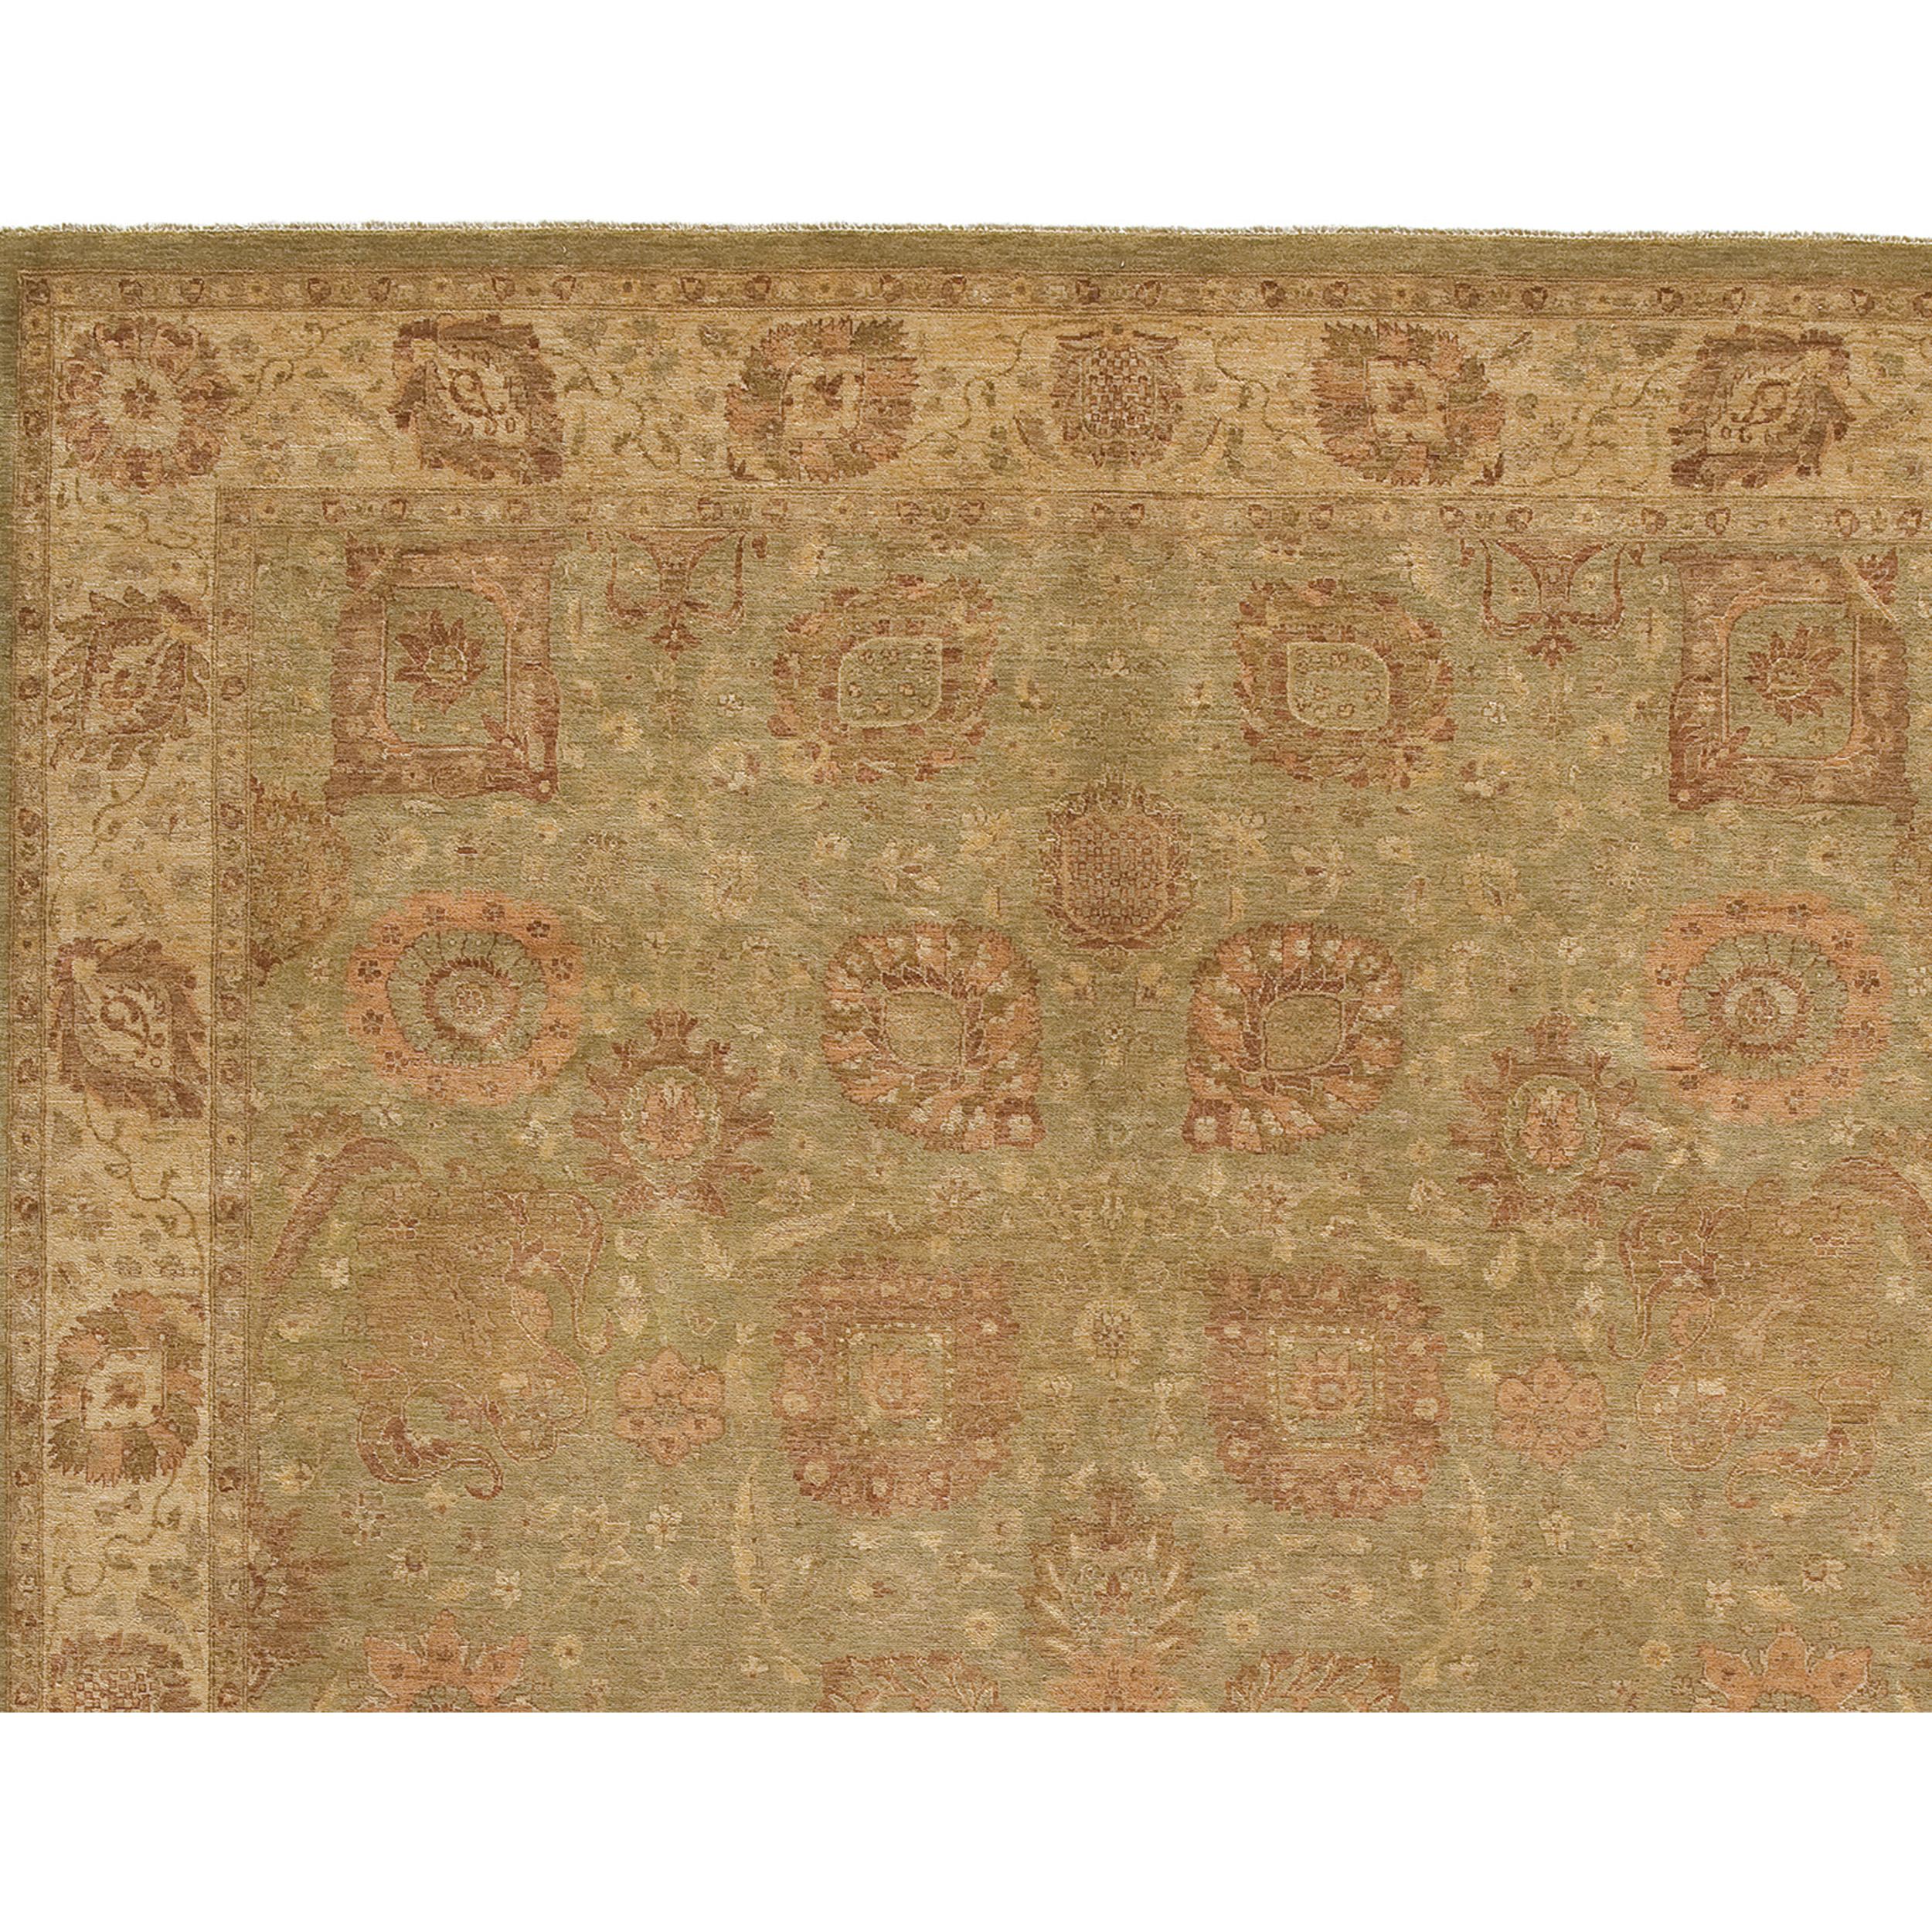 Luxury Traditional Hand-Knotted Vase Pistachio and Ivory 10x14 Rug In New Condition For Sale In Secaucus, NJ